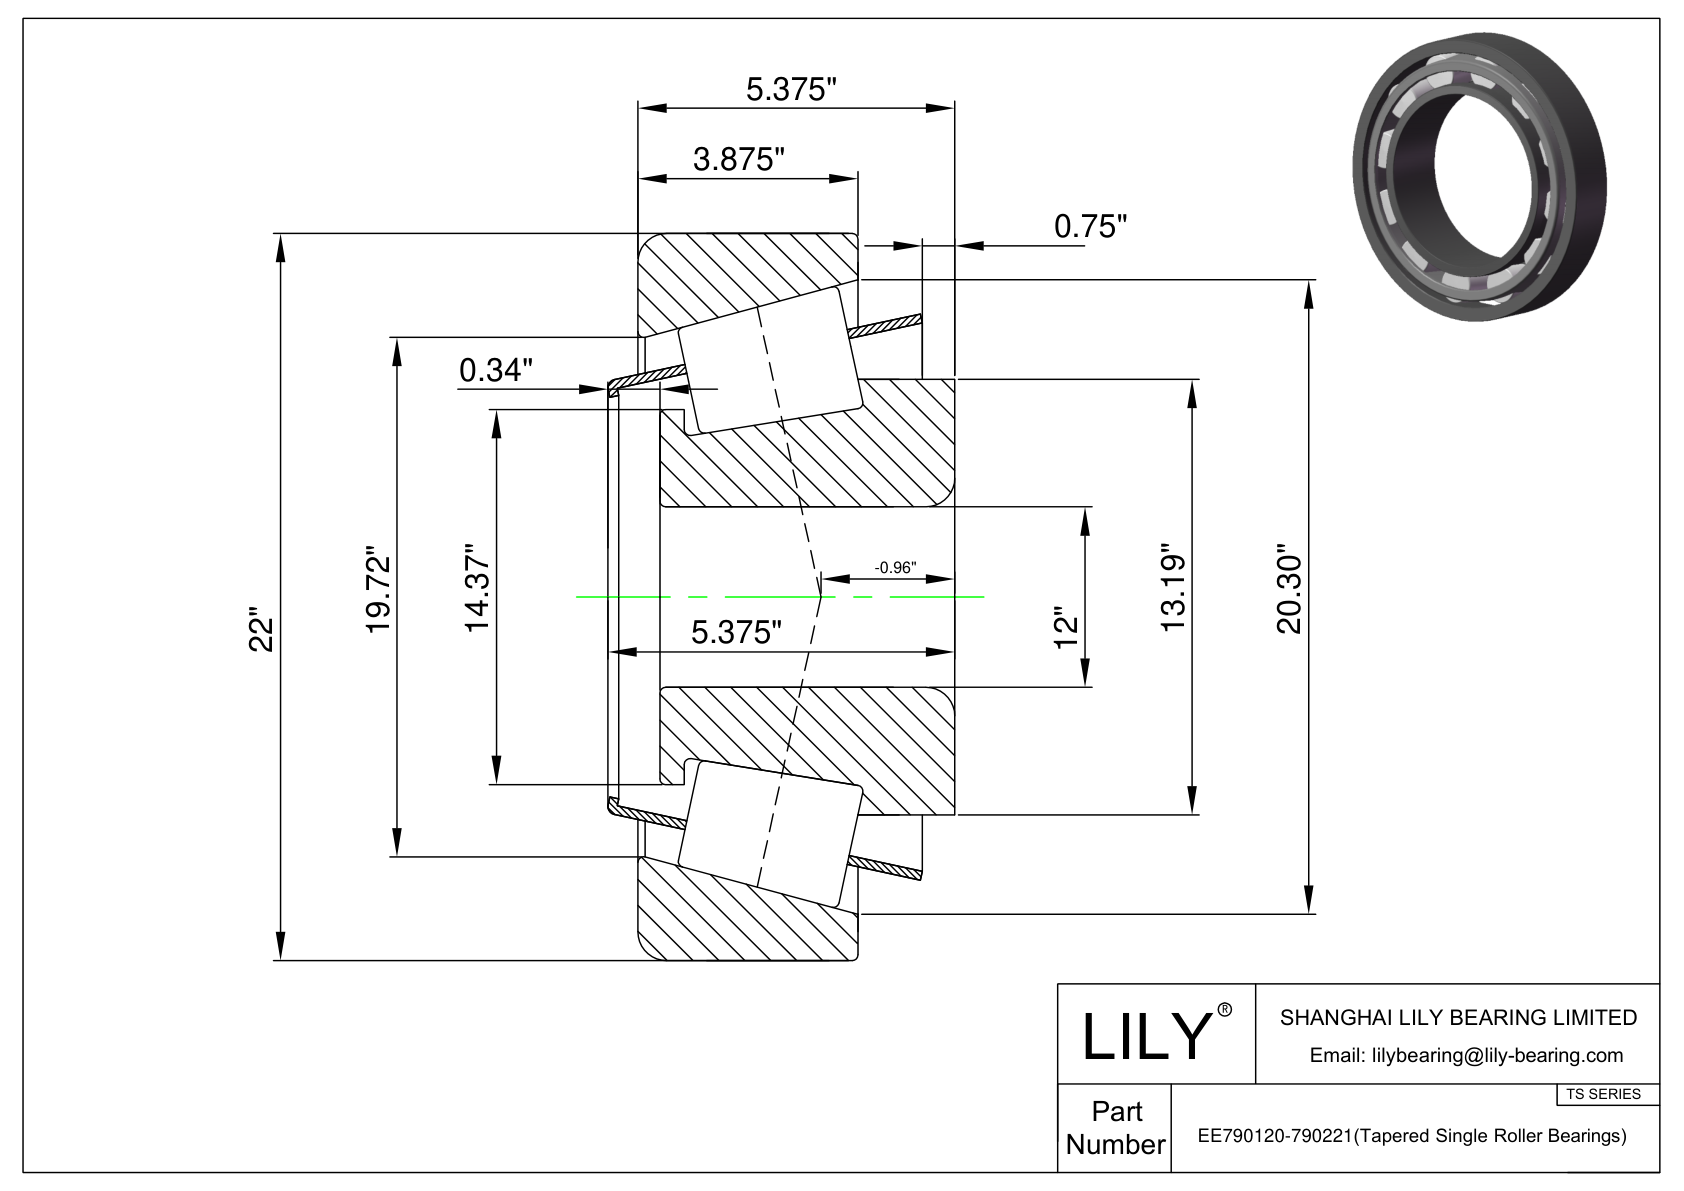 EE790120-790221 TS (Tapered Single Roller Bearings) (Imperial) cad drawing